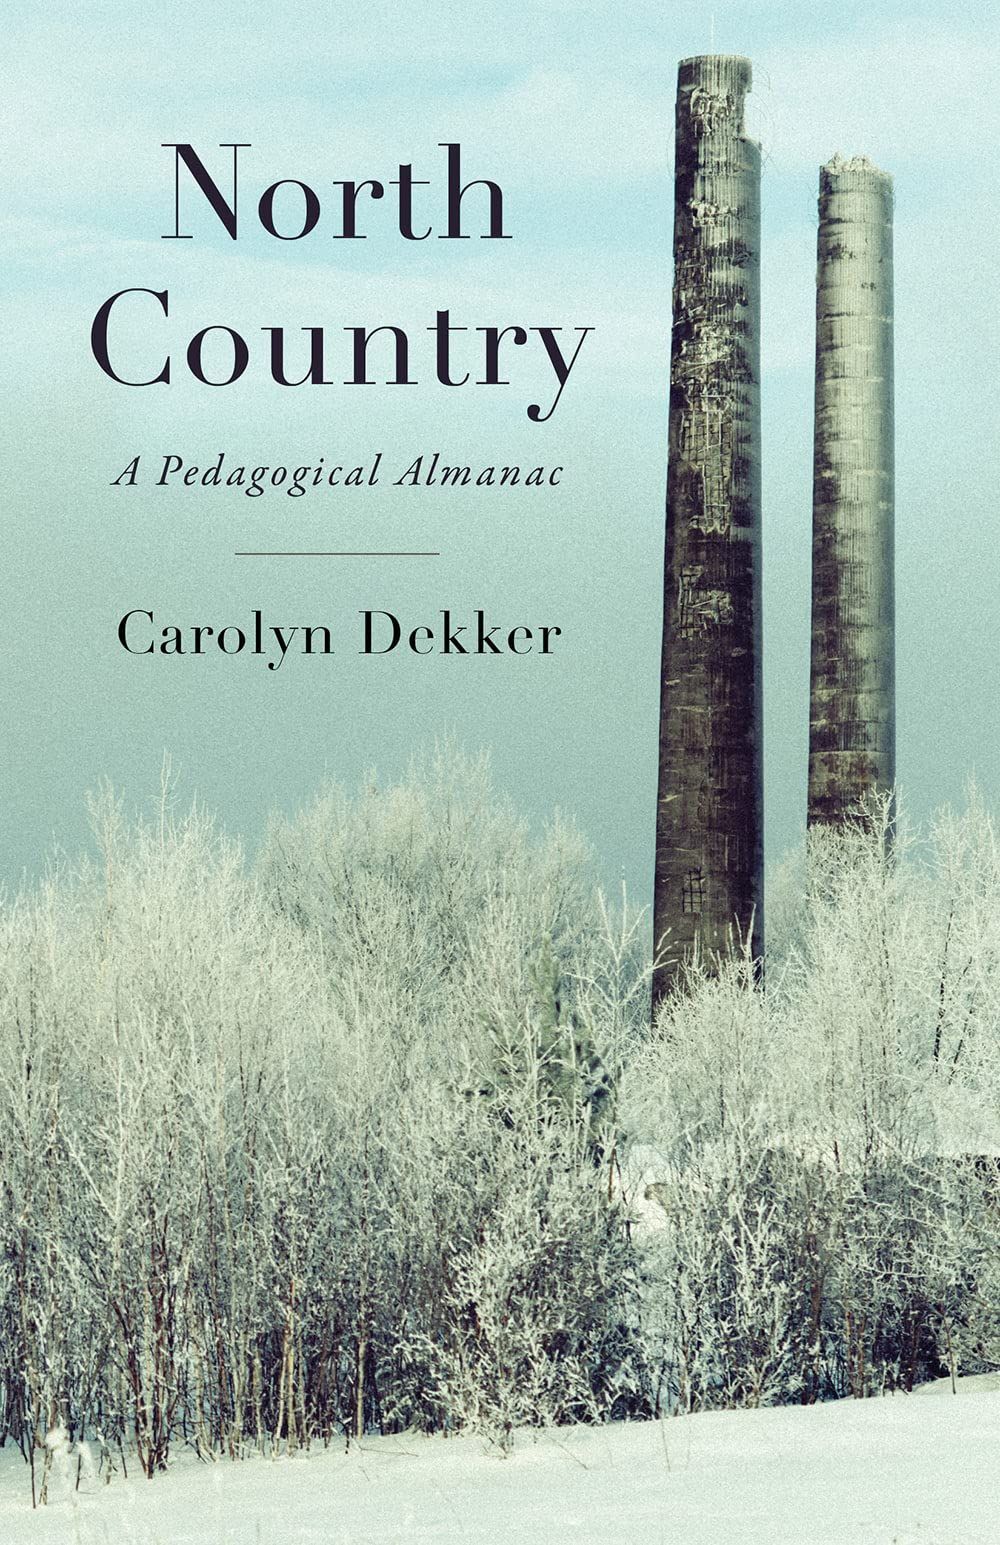 Swan Song for a University: On Carolyn Dekker’s “North Country”